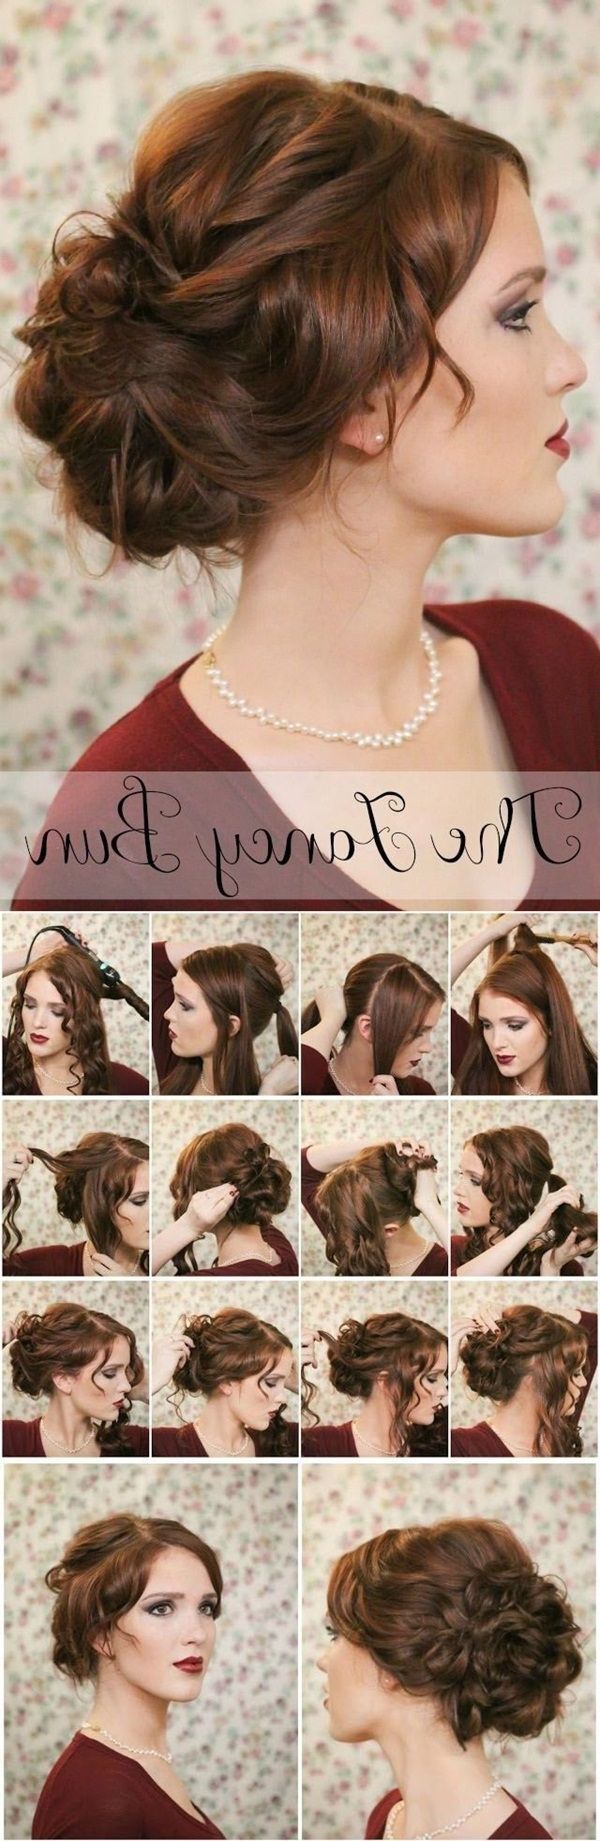 Most Current Easy Bridesmaid Hairstyles For Medium Length Hair Within 20 Diy Wedding Hairstyles With Tutorials To Try On Your Own (View 11 of 15)